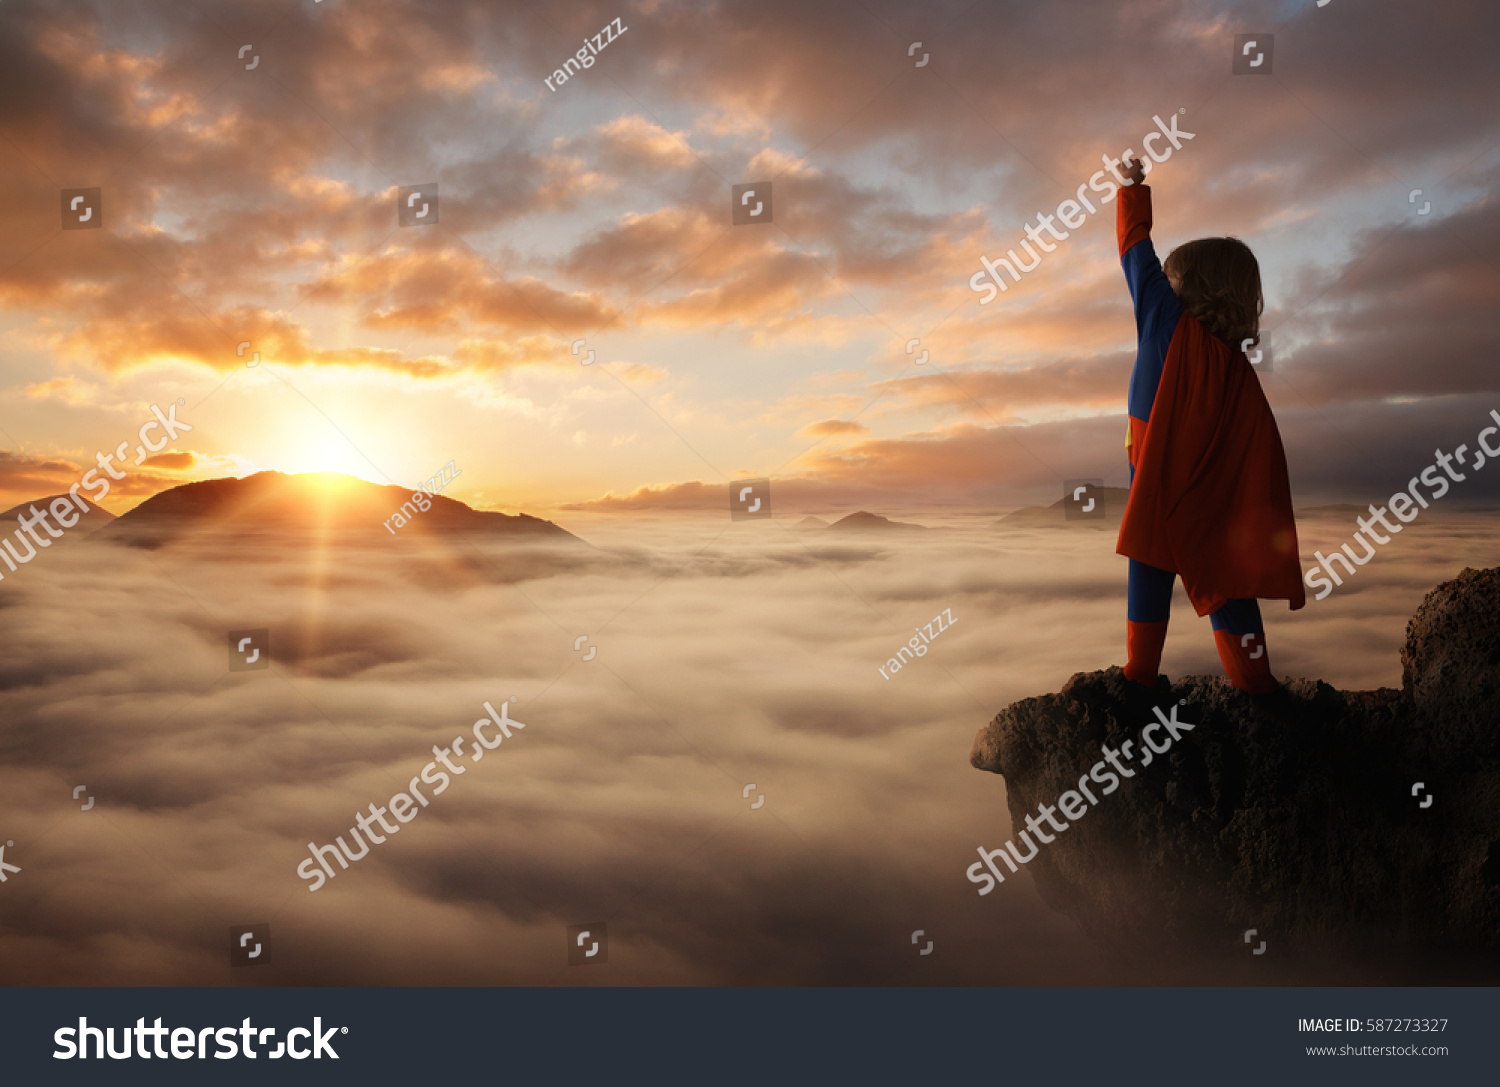 Little boy acting like a superhero on top of the mountain at sunset with copy space #587273327